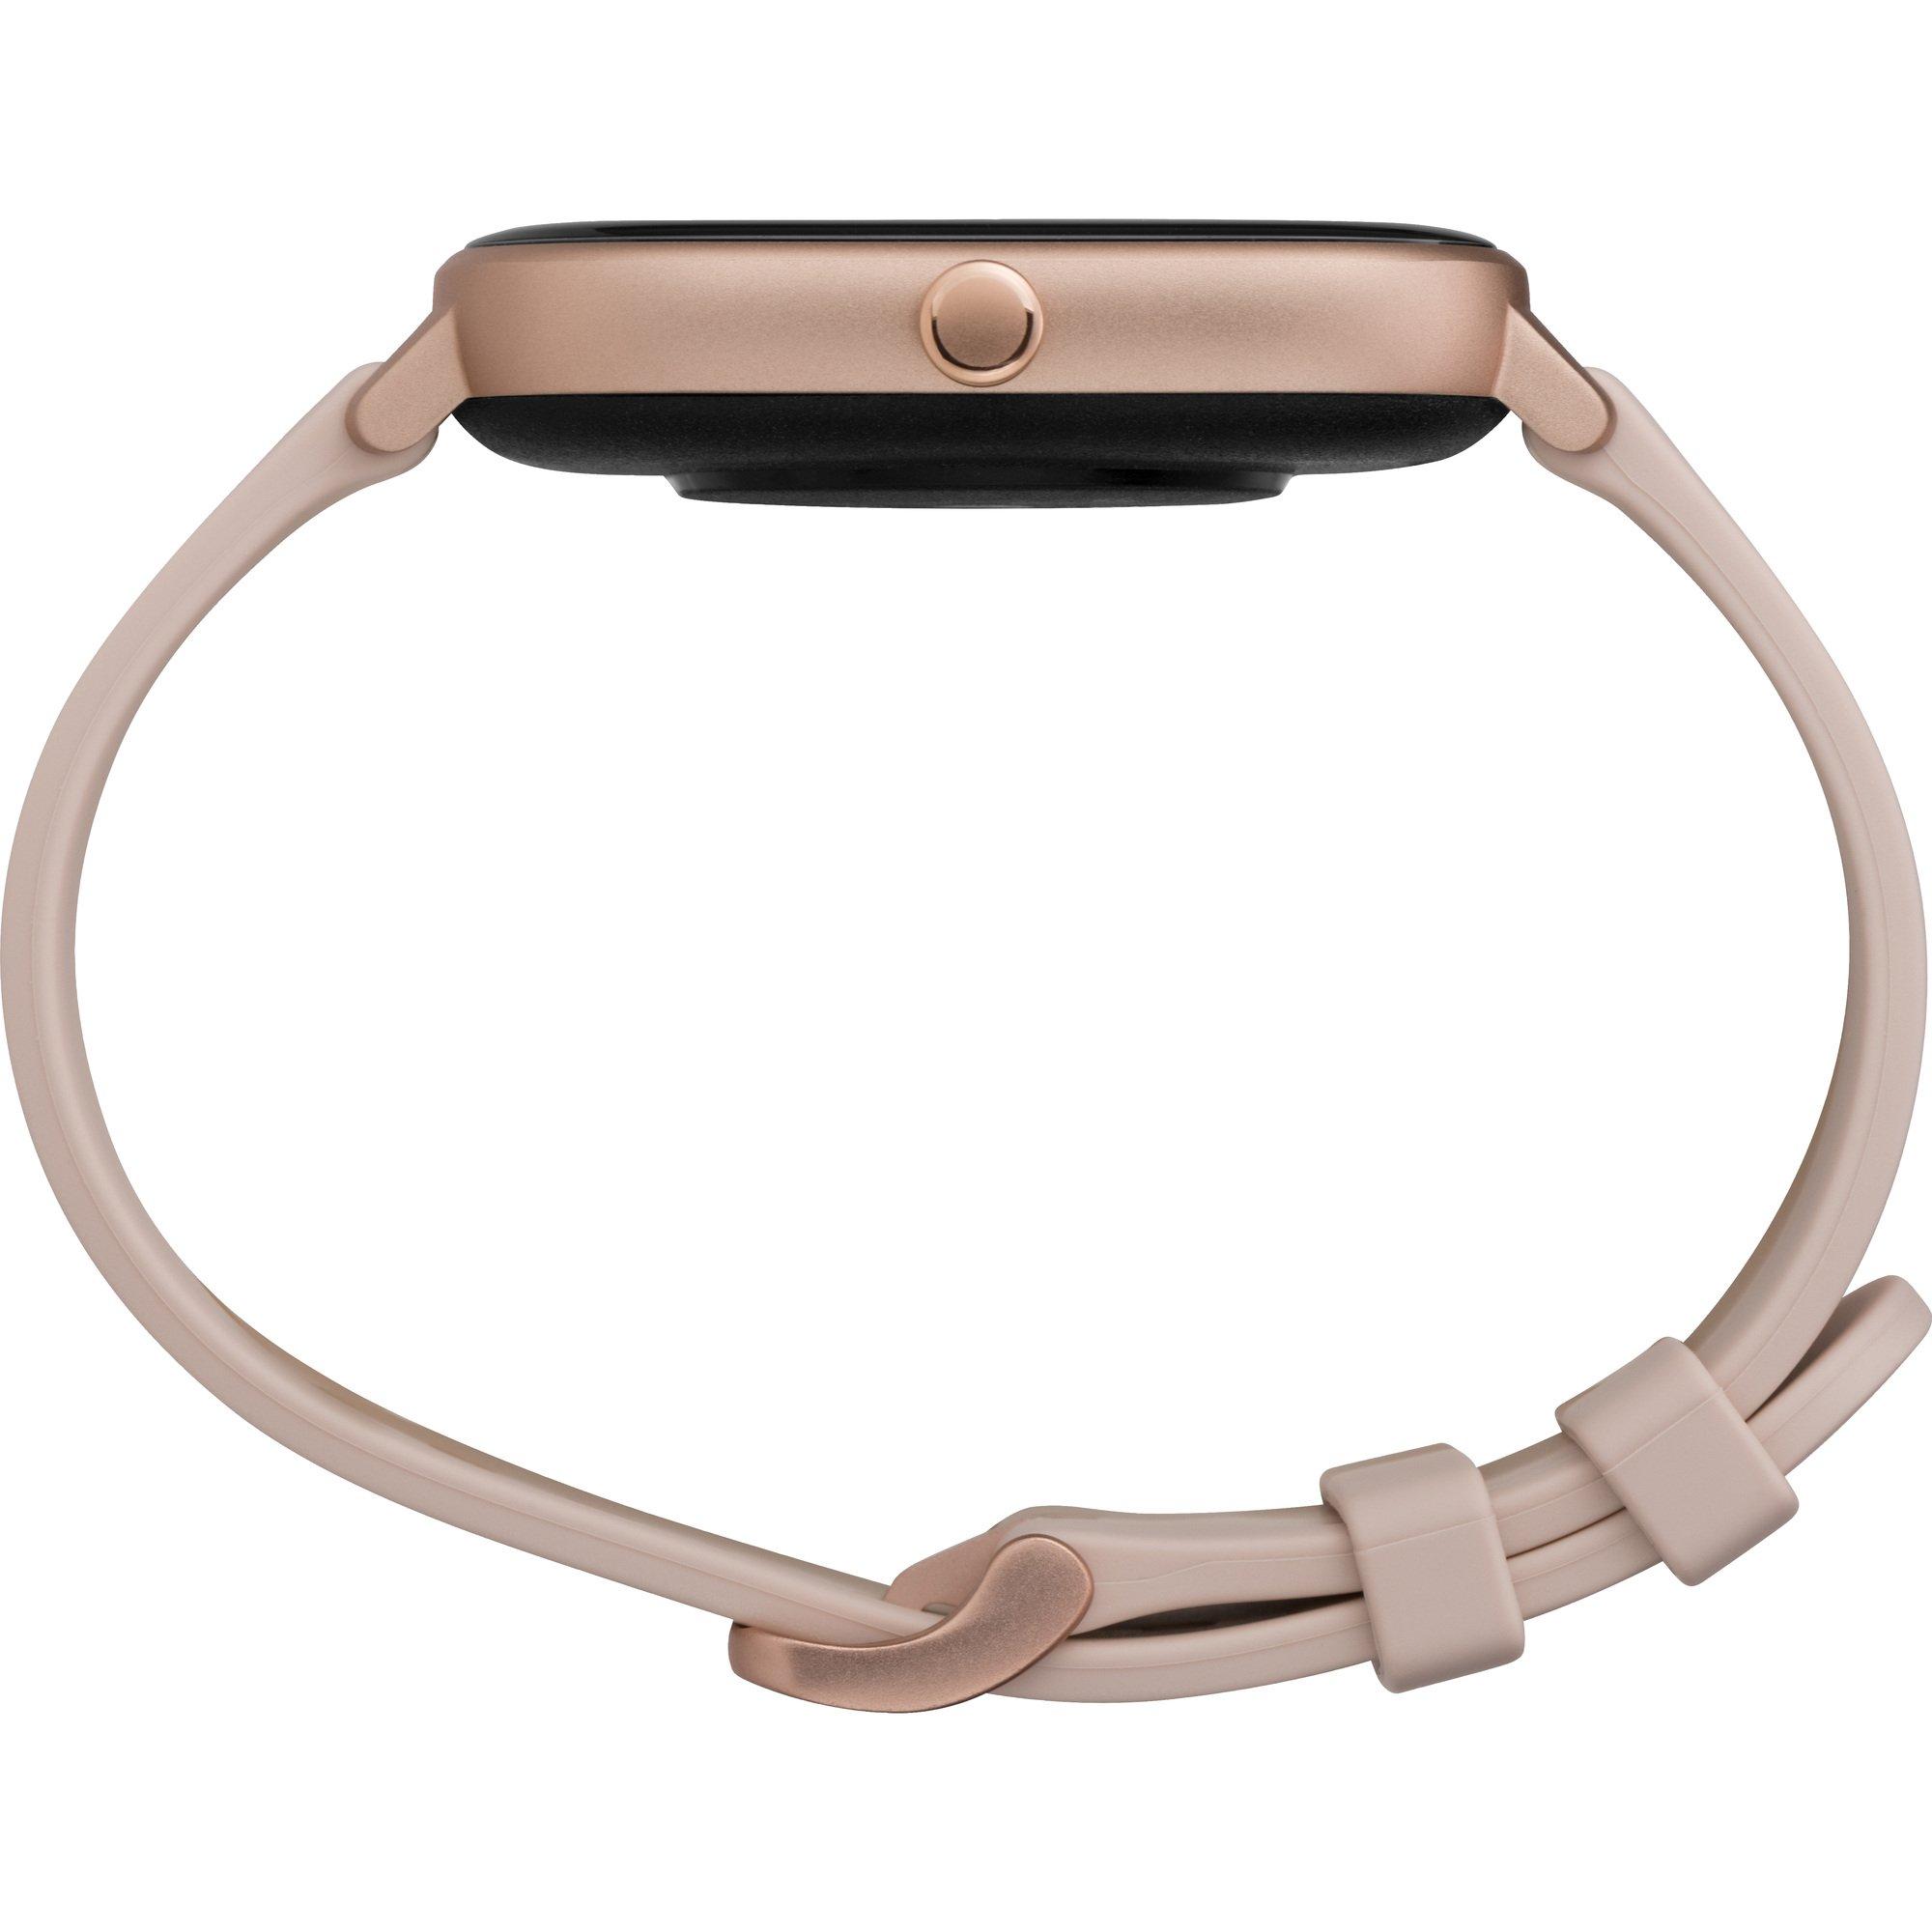 list item 2 of 4 Timex Metropolitan R AMOLED GPS & Heart Rate 42mm Smartwatch Rose Gold with Blush Silicone Strap